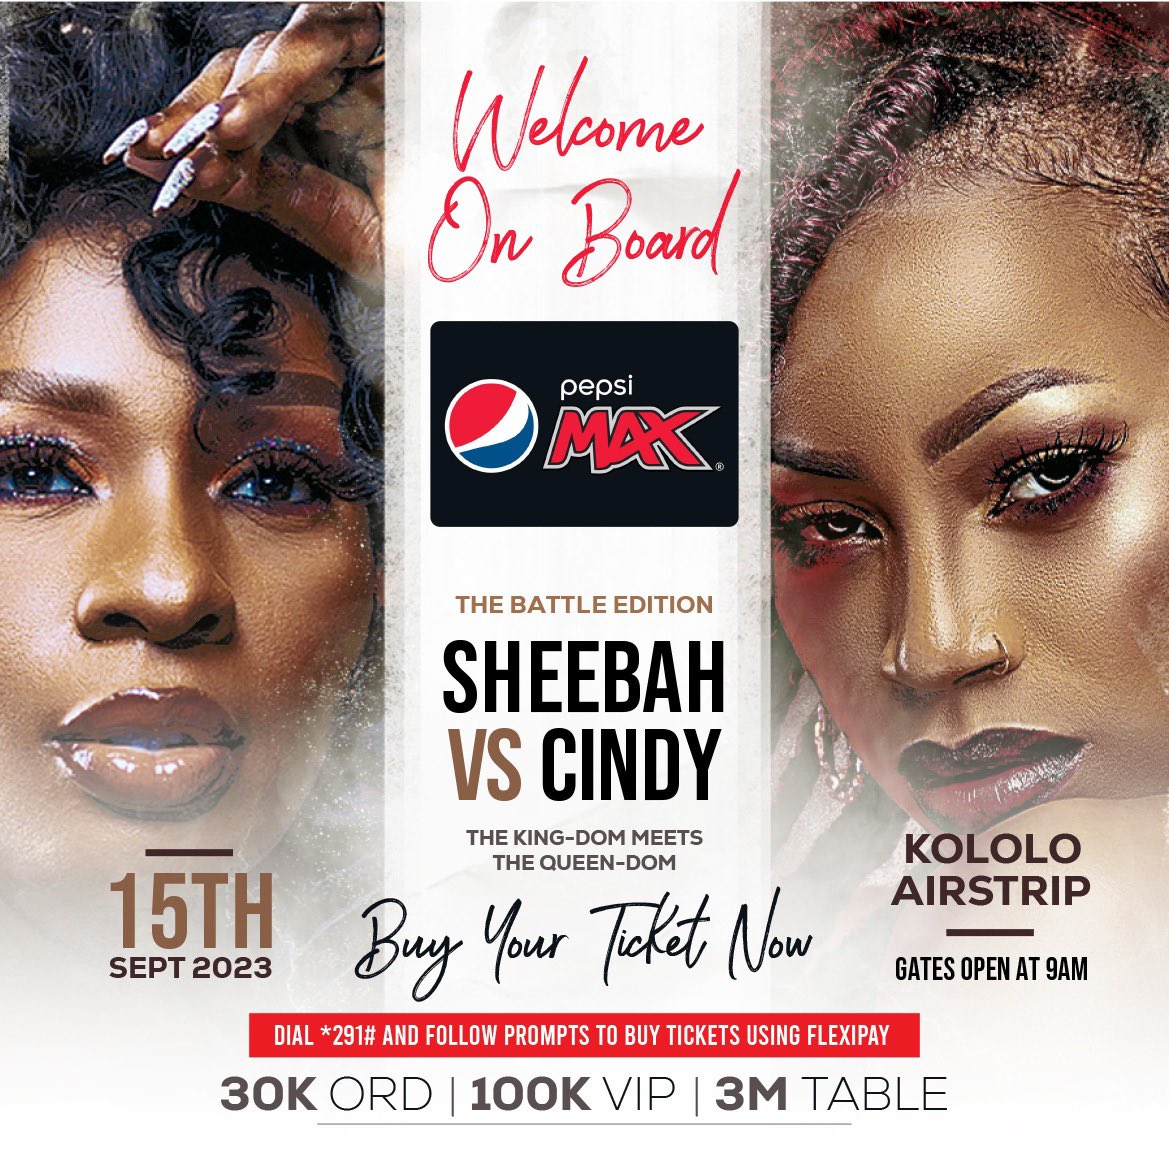 Kololo Airstrip will ask for refreshments on September 15, and fortunately, 𝐏𝐞𝐩𝐬𝐢 𝐌𝐀𝐗 will be on-site to meet that need. #CindyVsSheebah is drawing nearer by the minute. With that in mind, have you secured your pass? If not, please dial *291# and follow the prompts to…